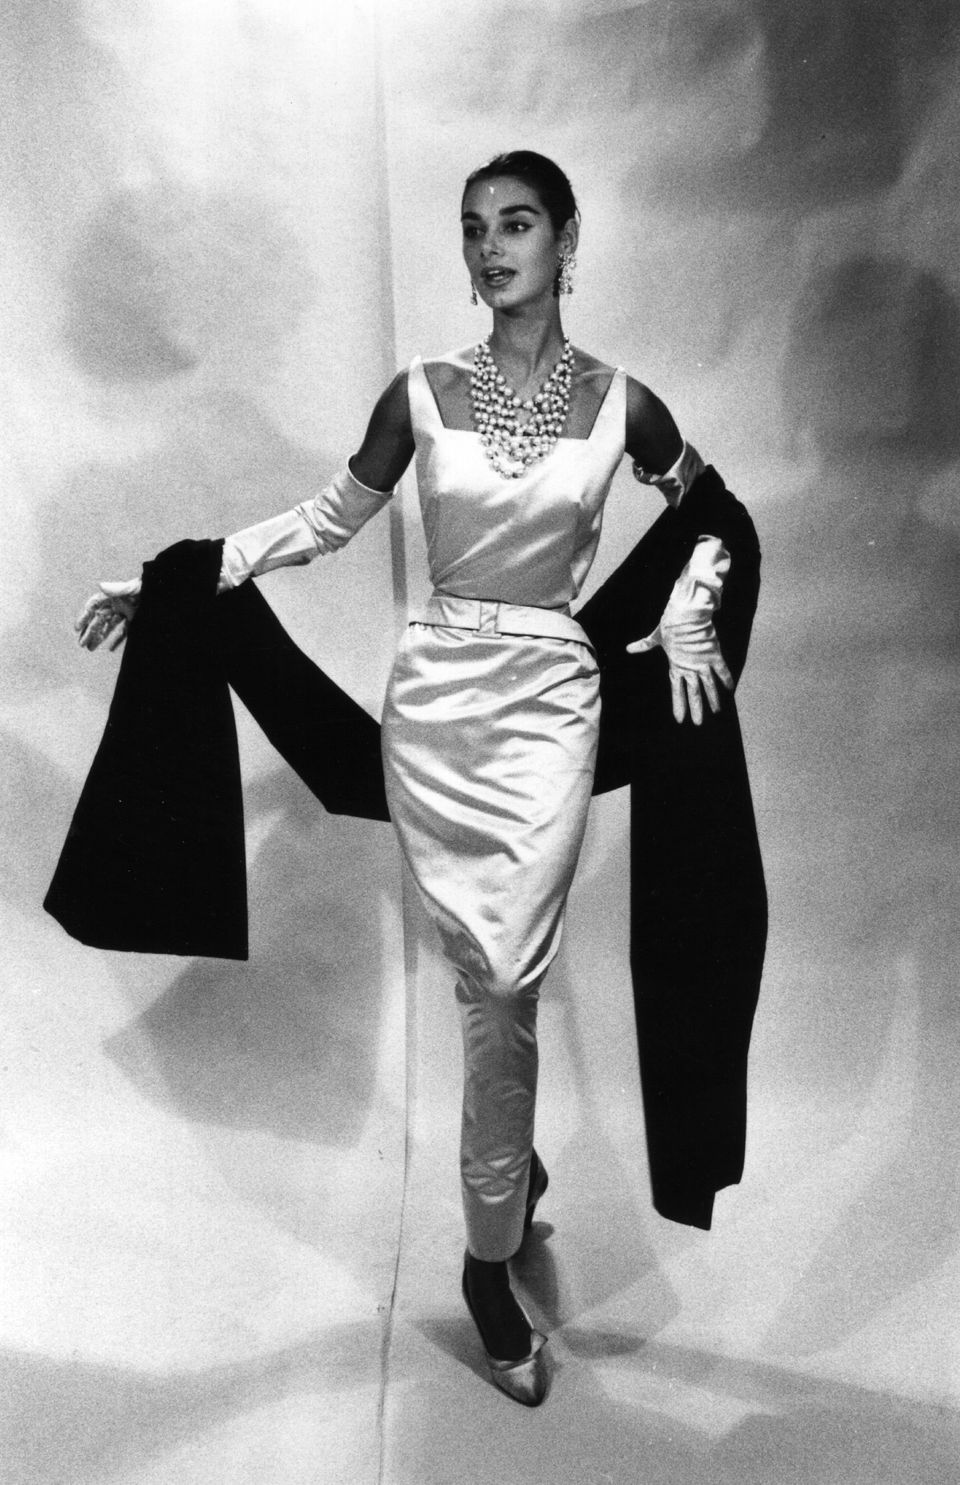 These Photos Take A Look Back At Hubert de Givenchy's Stunning Career |  HuffPost Life